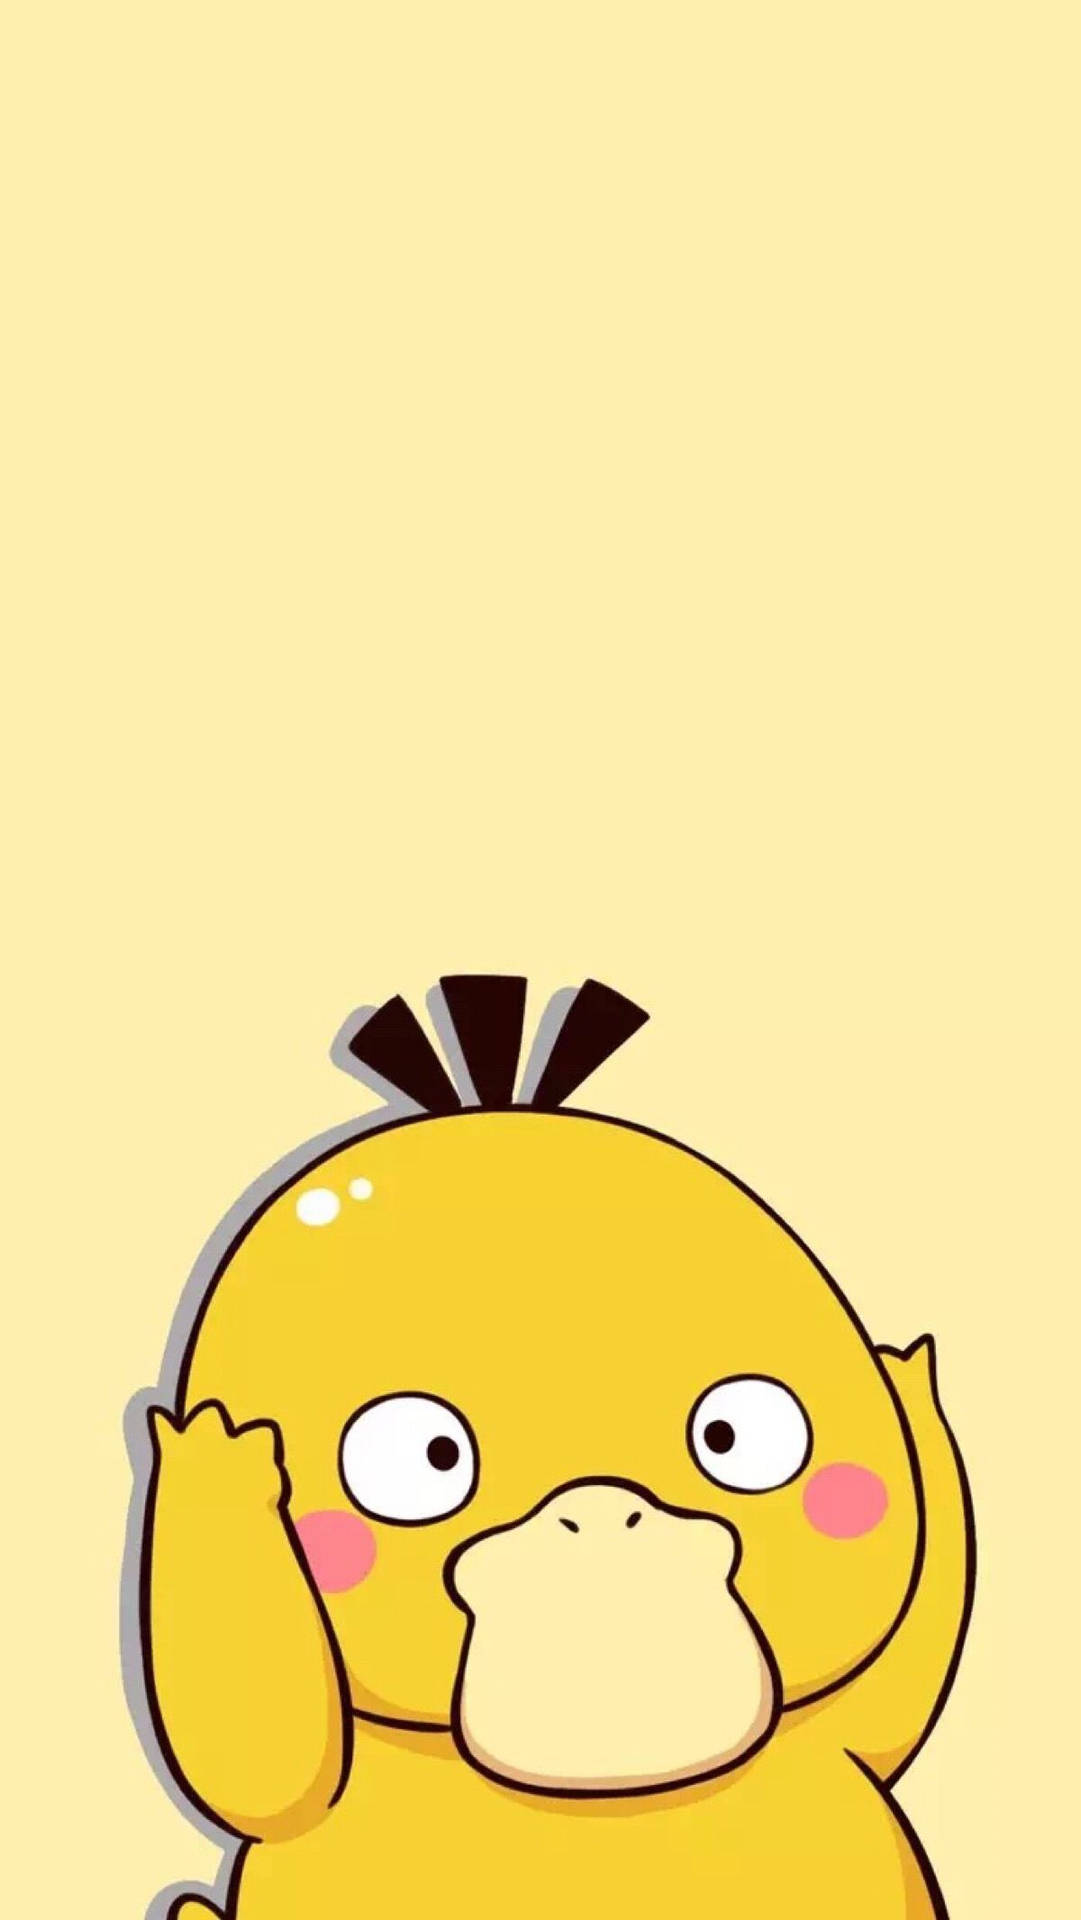 This Jolly Psyduck Is Ready For A Good Time! Background